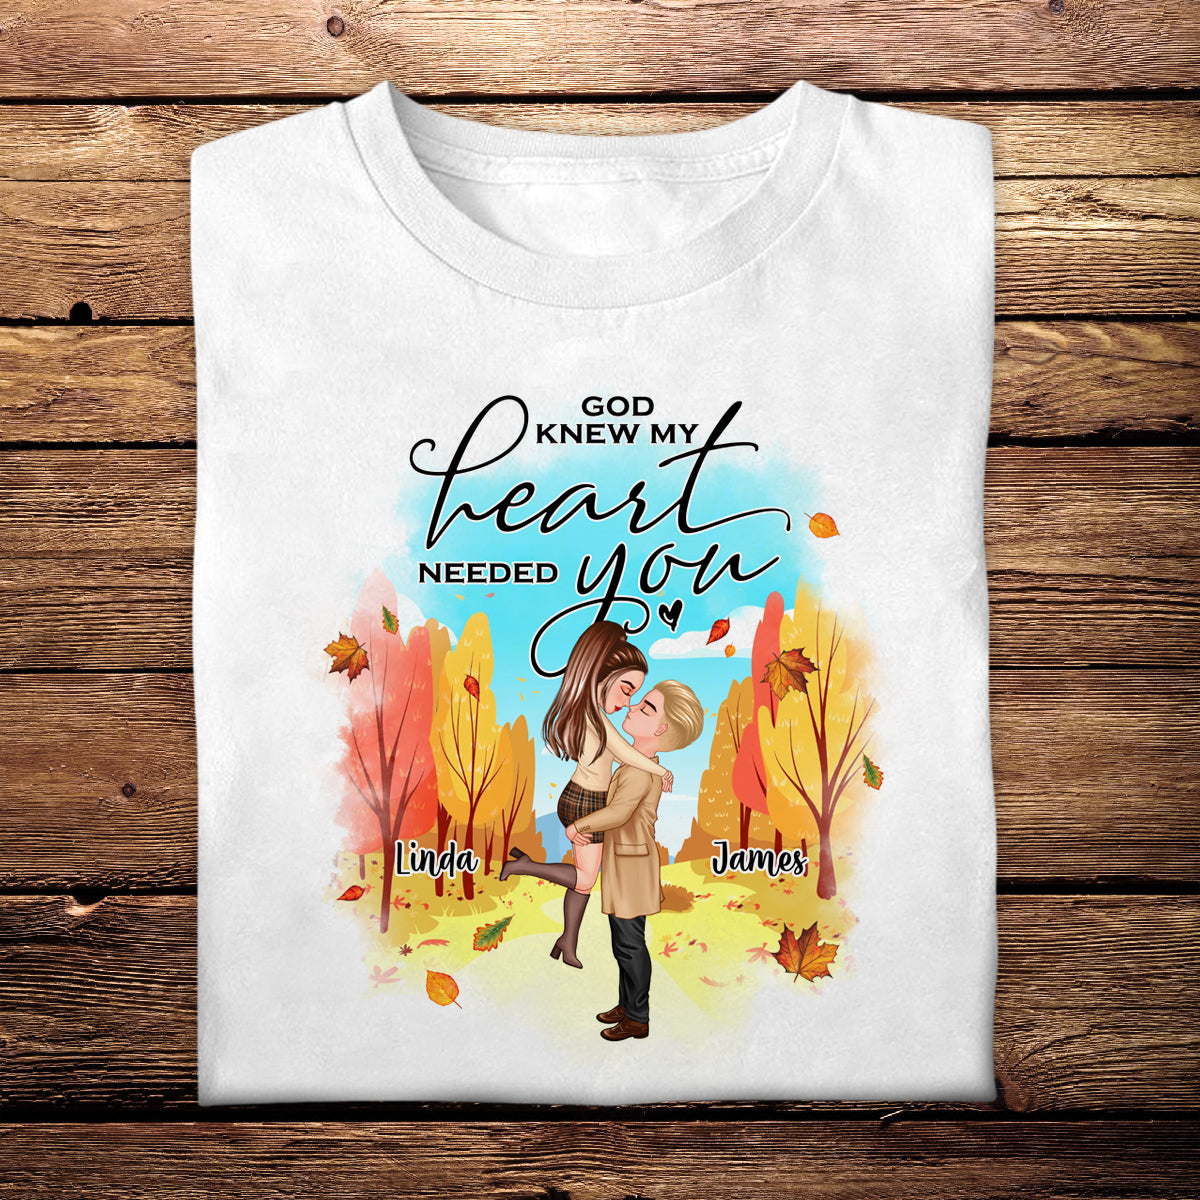 All Of Me Loves All Of You - Personalized Apparel - Gift For Couple, Autumn, Fall Season banner1_6141fb94-dc1f-4528-946c-f8153a161f86.jpg?v=1691046261